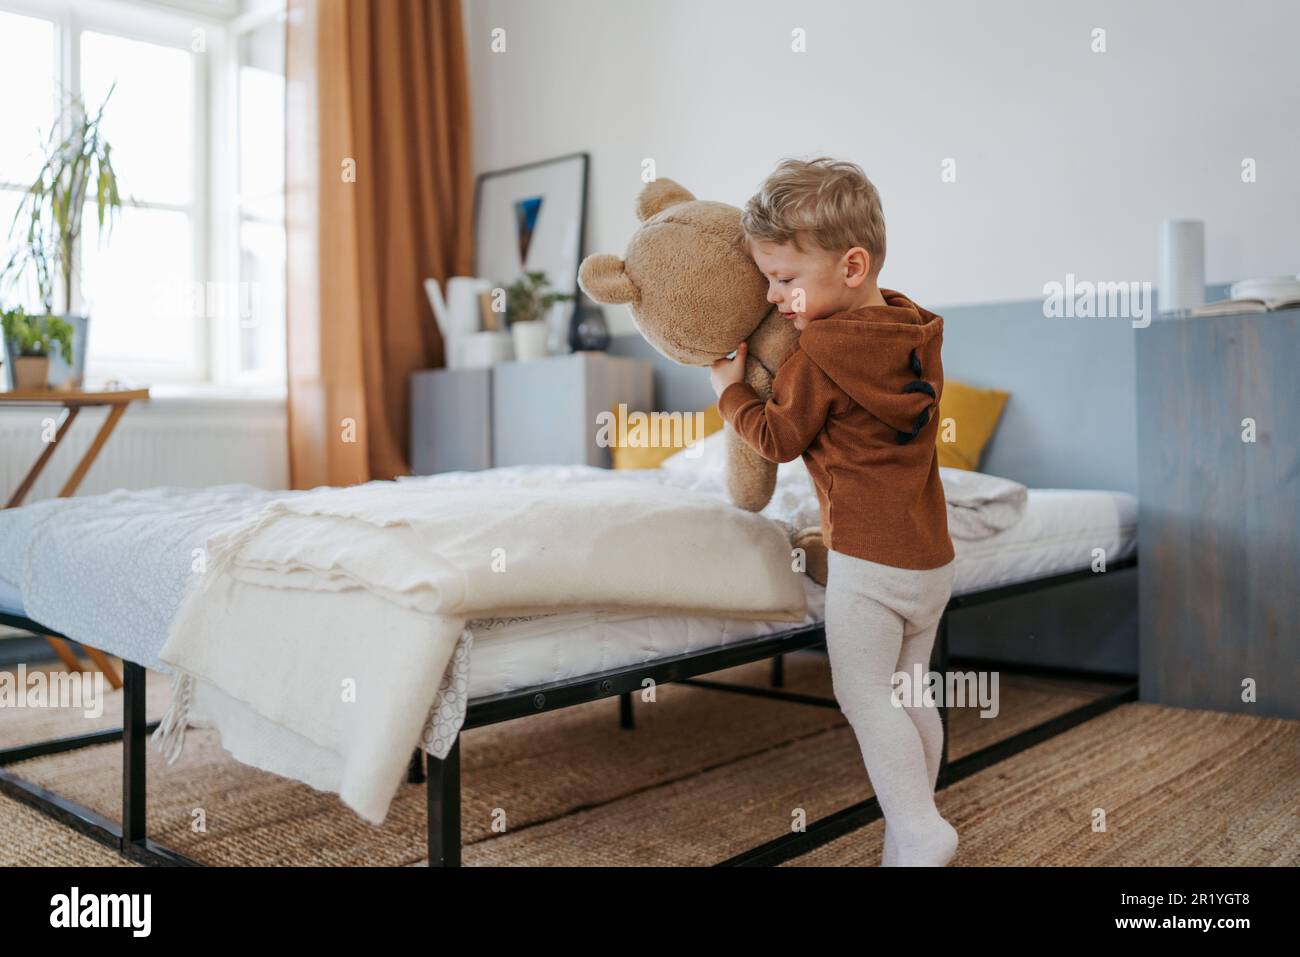 Little boy cuddling with bear toy in bedroom. Stock Photo